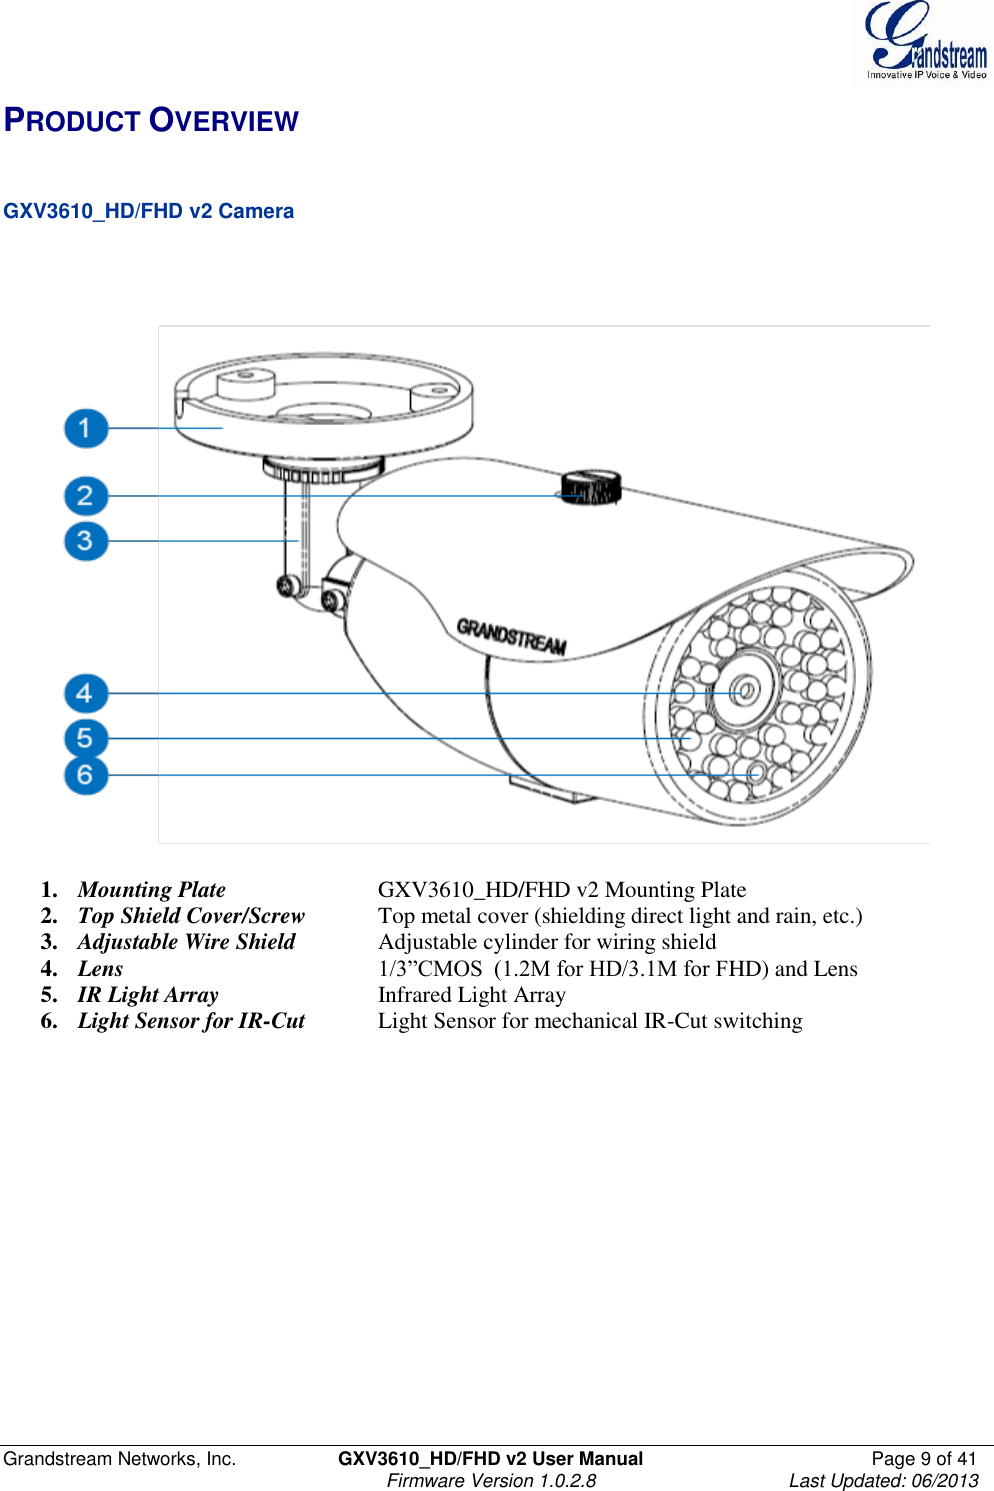  Grandstream Networks, Inc.  GXV3610_HD/FHD v2 User Manual  Page 9 of 41    Firmware Version 1.0.2.8  Last Updated: 06/2013  PRODUCT OVERVIEW   GXV3610_HD/FHD v2 Camera        1. Mounting Plate     GXV3610_HD/FHD v2 Mounting Plate 2. Top Shield Cover/Screw  Top metal cover (shielding direct light and rain, etc.) 3. Adjustable Wire Shield   Adjustable cylinder for wiring shield 4. Lens        1/3”CMOS  (1.2M for HD/3.1M for FHD) and Lens  5. IR Light Array      Infrared Light Array 6. Light Sensor for IR-Cut  Light Sensor for mechanical IR-Cut switching   